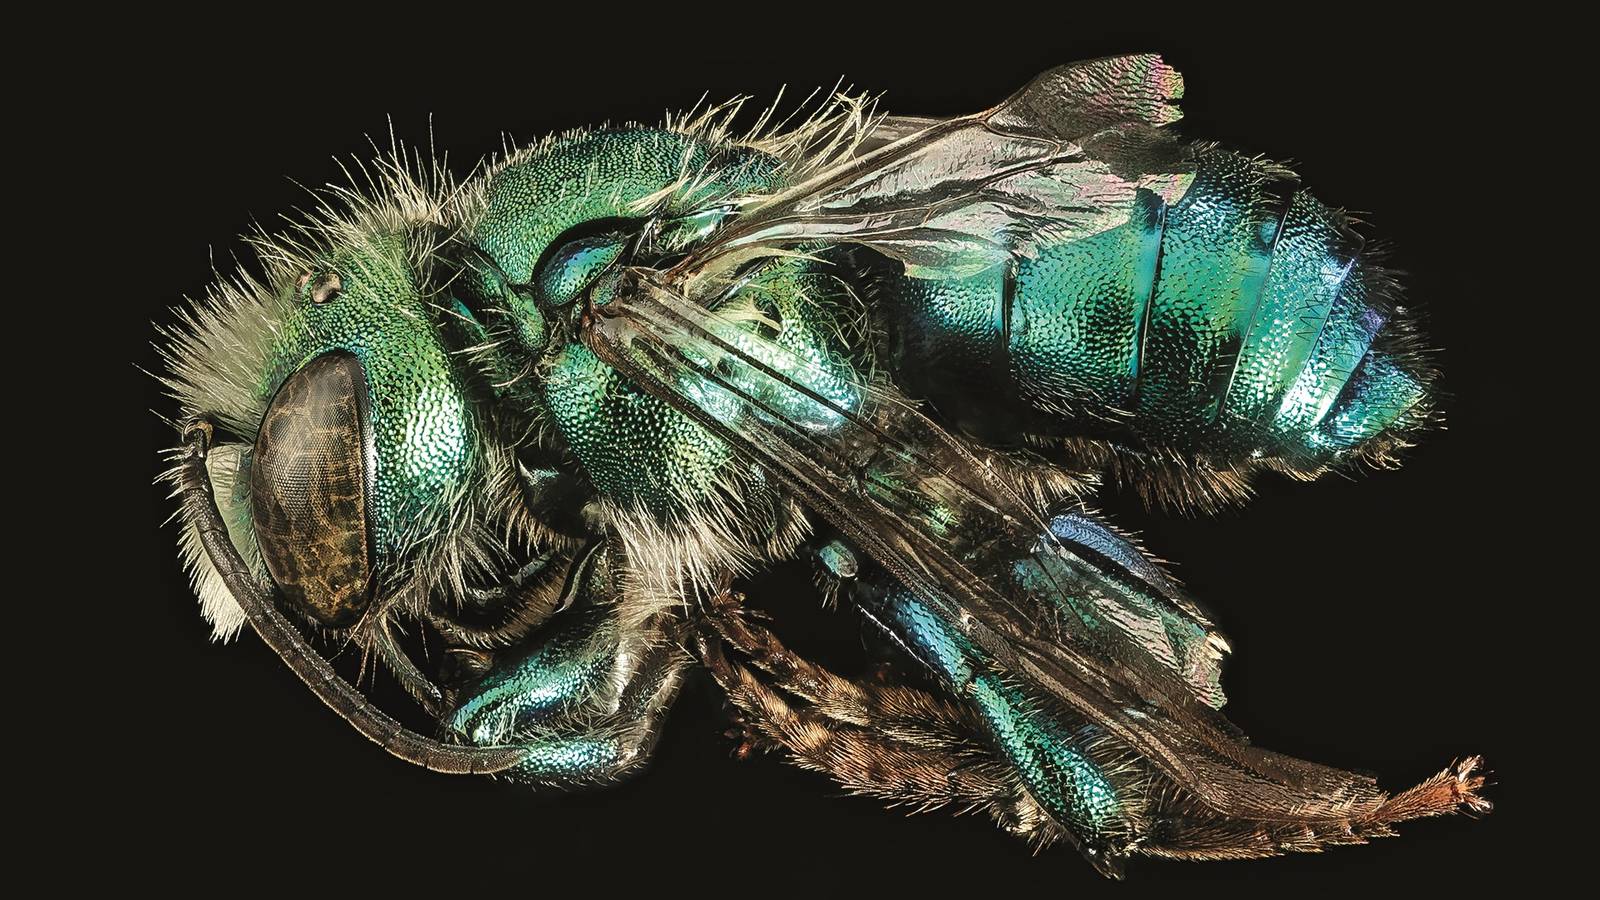 <h3 style="text-align: center; padding: 50px;"><span class="text-Intro-style"><em>Osmia bruneri</em> (bee), Yellowstone National Park, Wyoming. © ELIZABETH GARCIA AND WAYNE BOO/USGS BEE INVENTORY AND MONITORING LAB</span></h3>